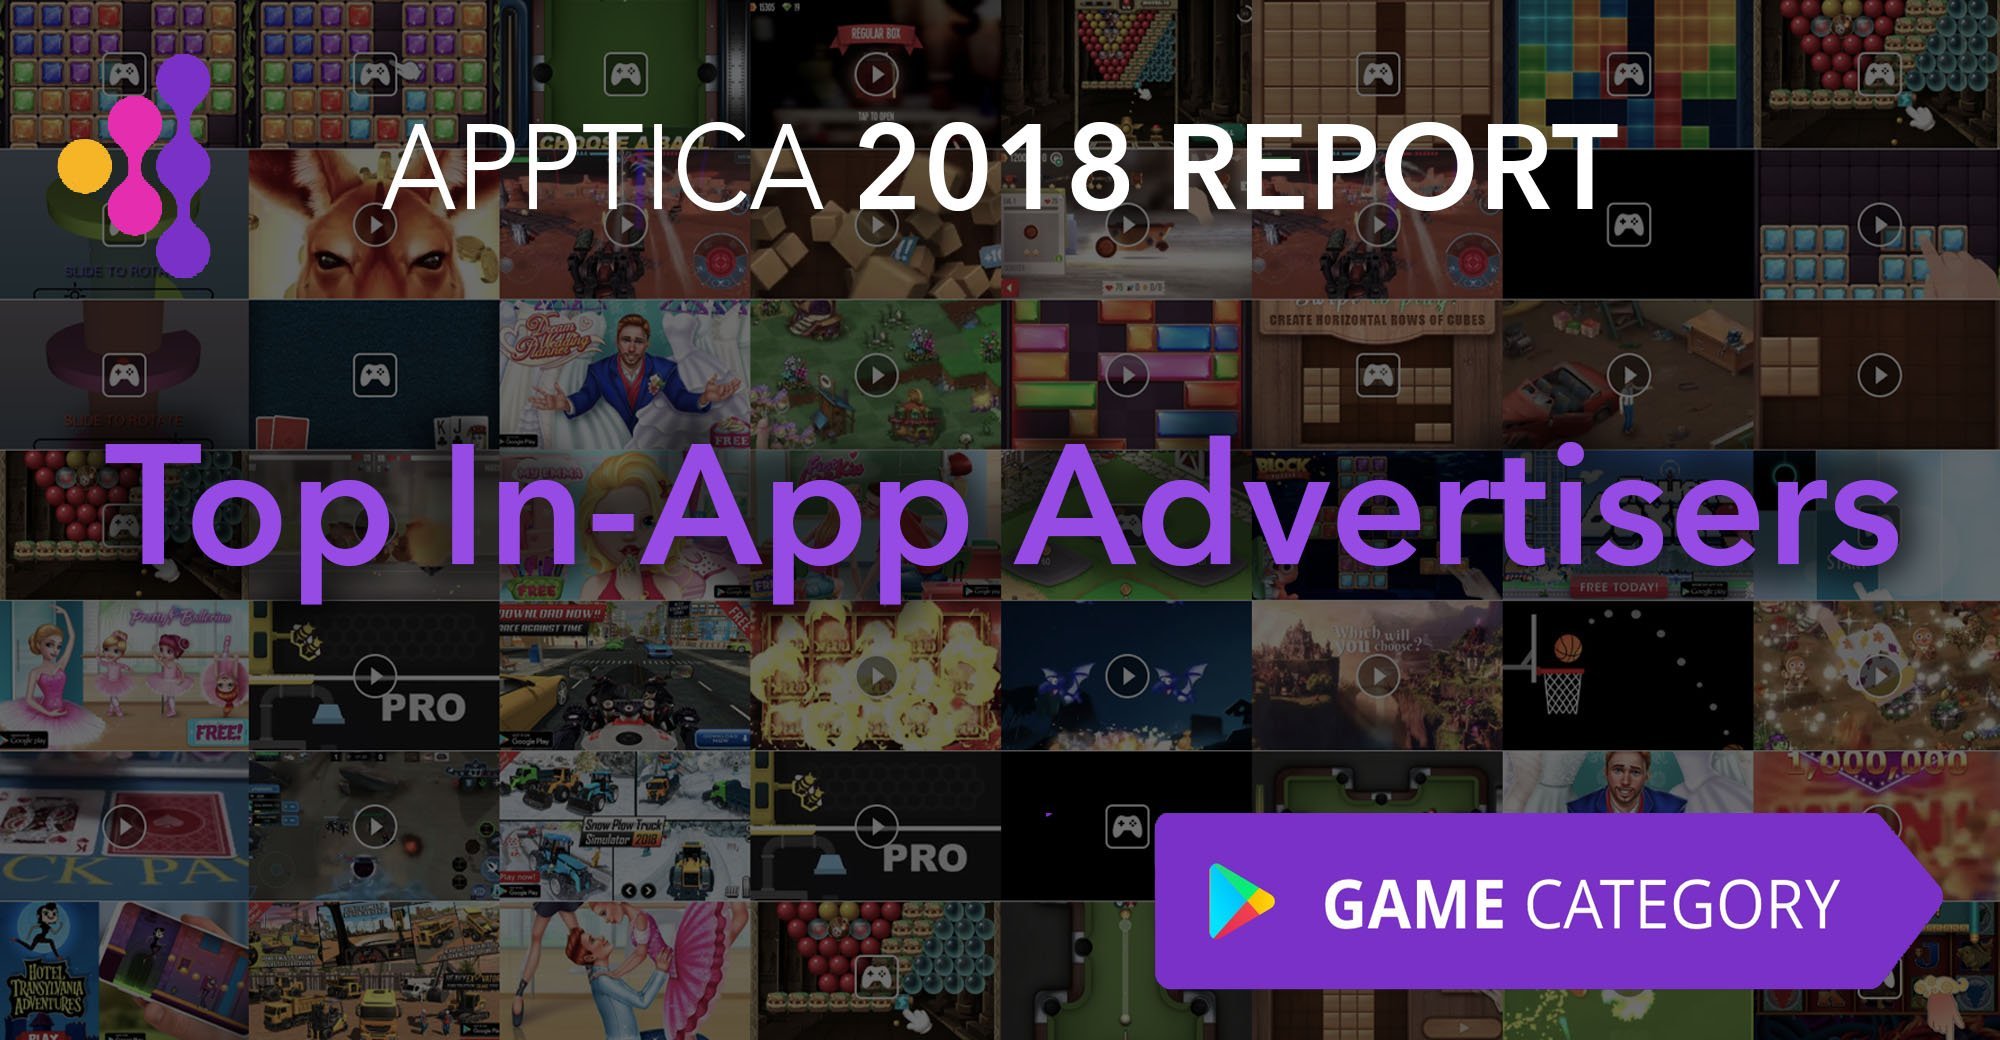 Best of Casual, Apptica Report on Top Advertisers 2018